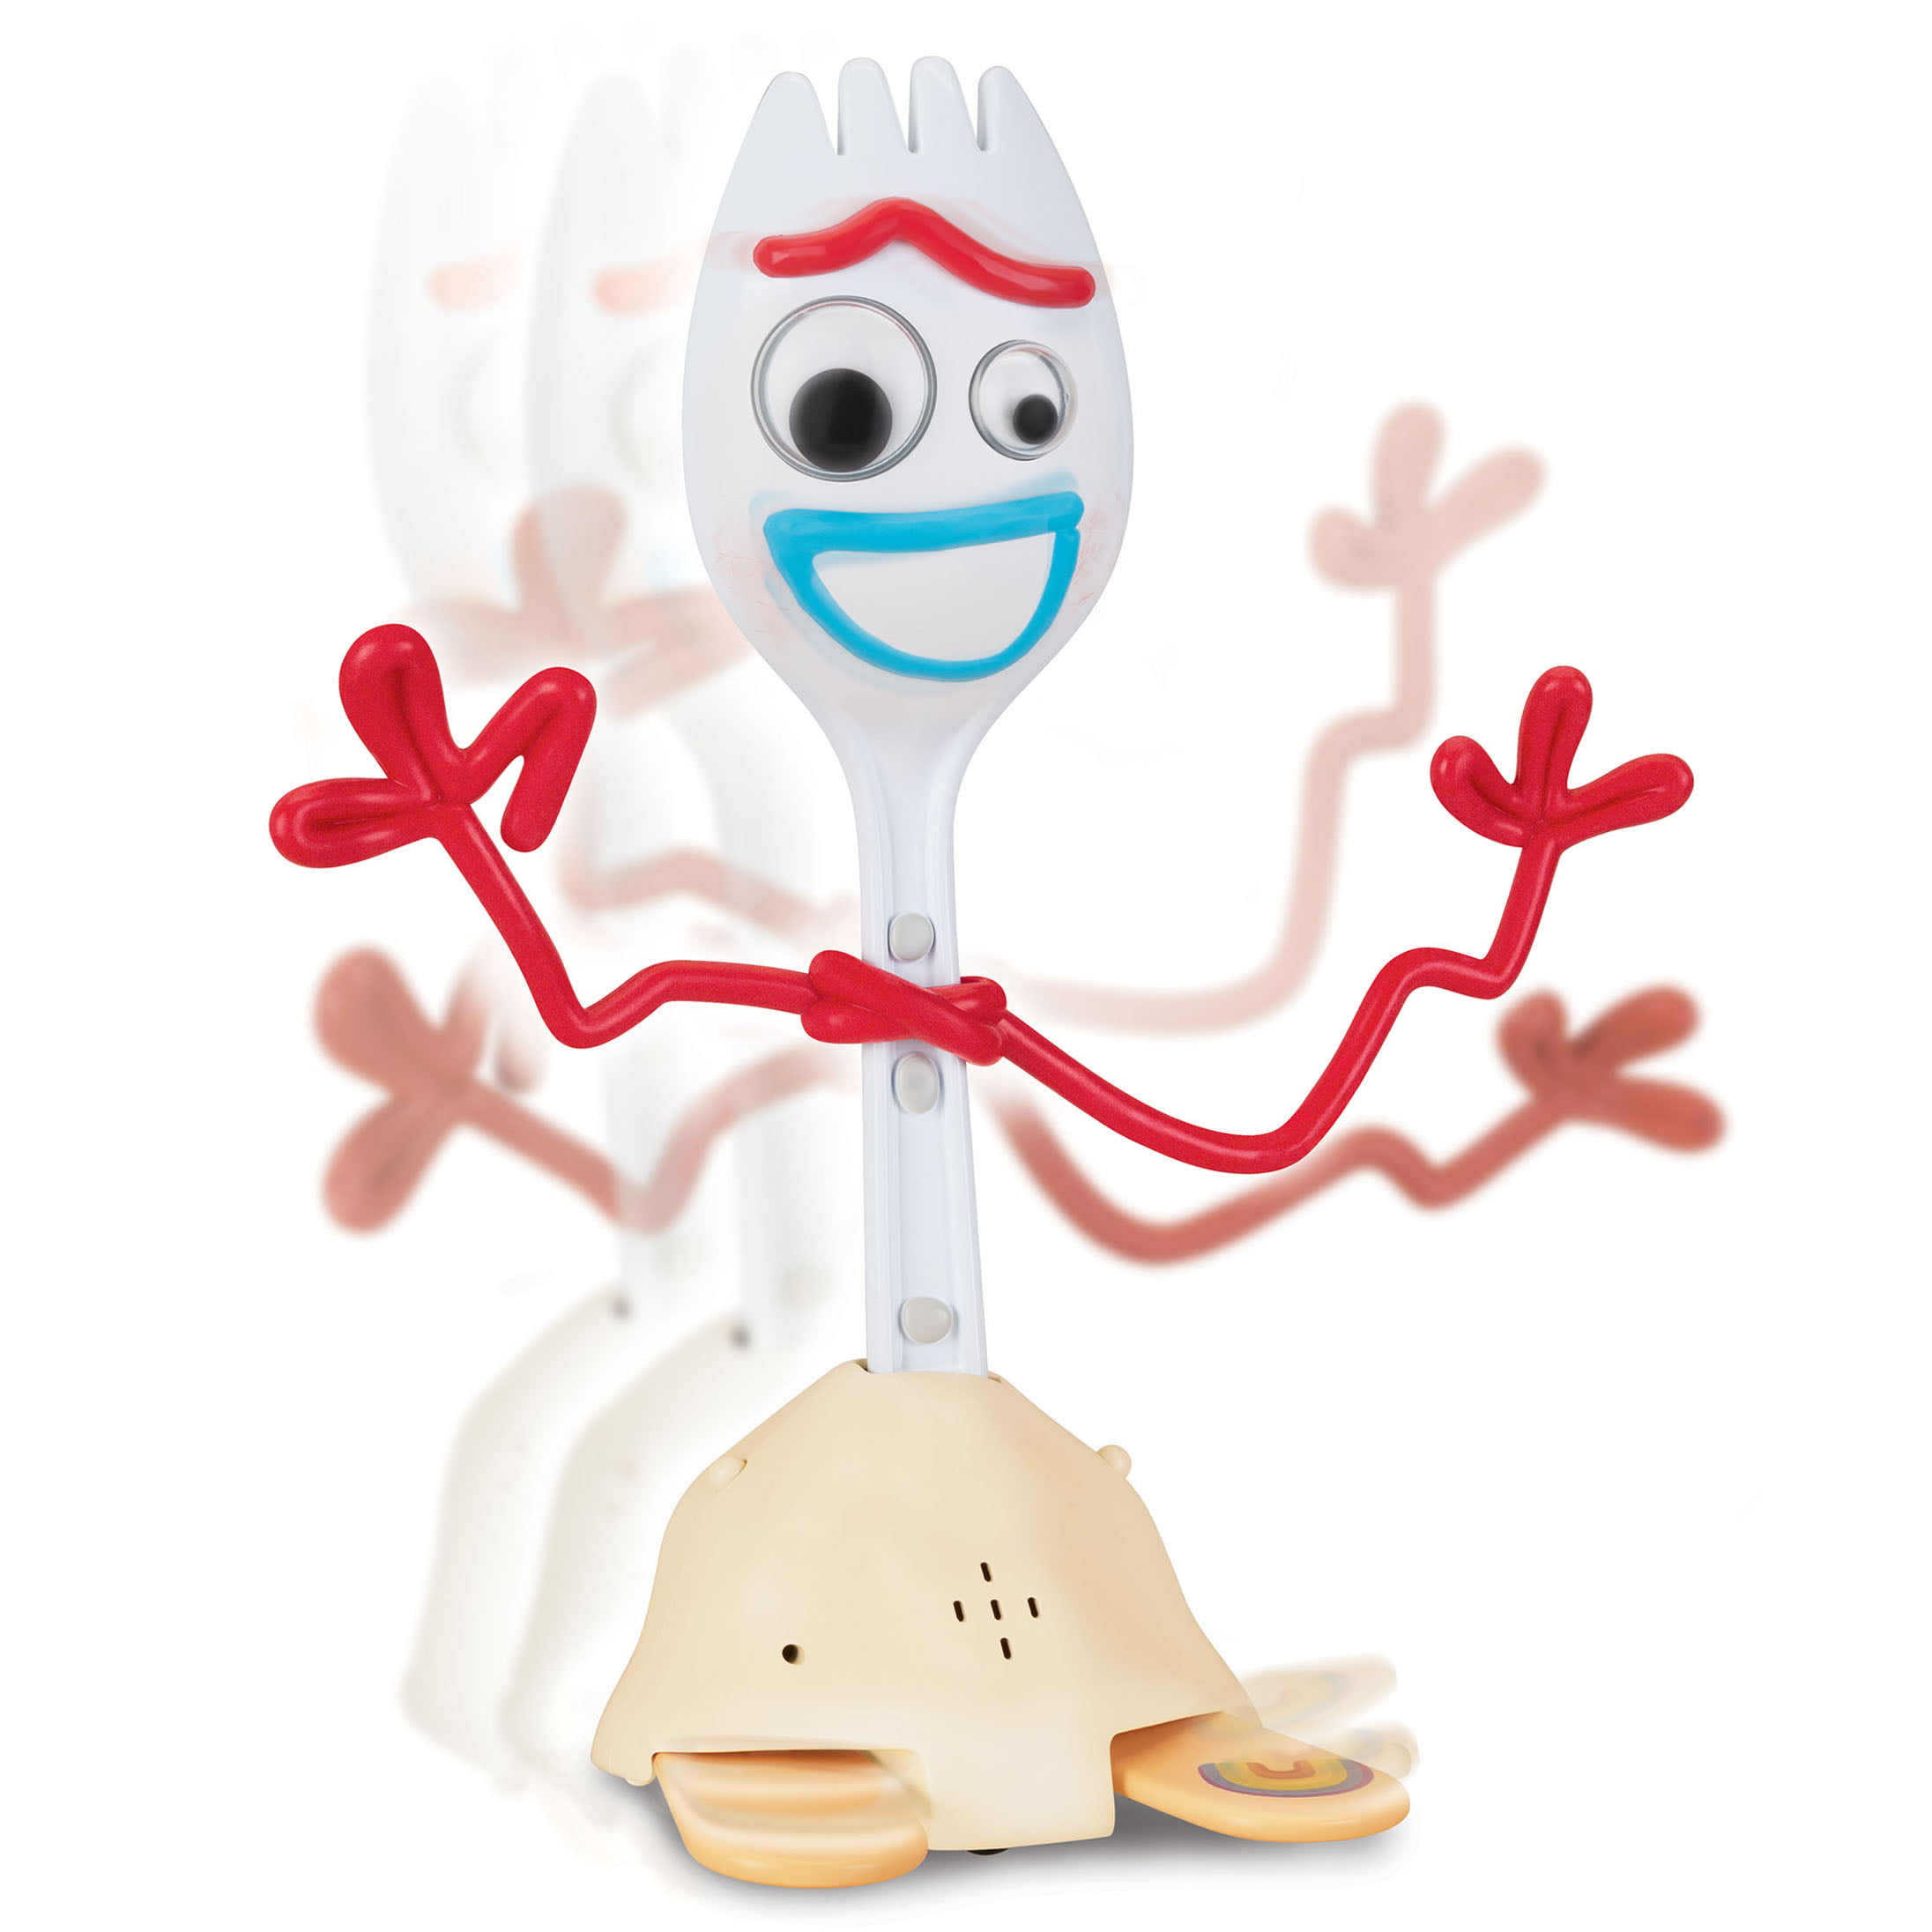 Forky from Toy Story helps with Bilateral Coordination and Grasp